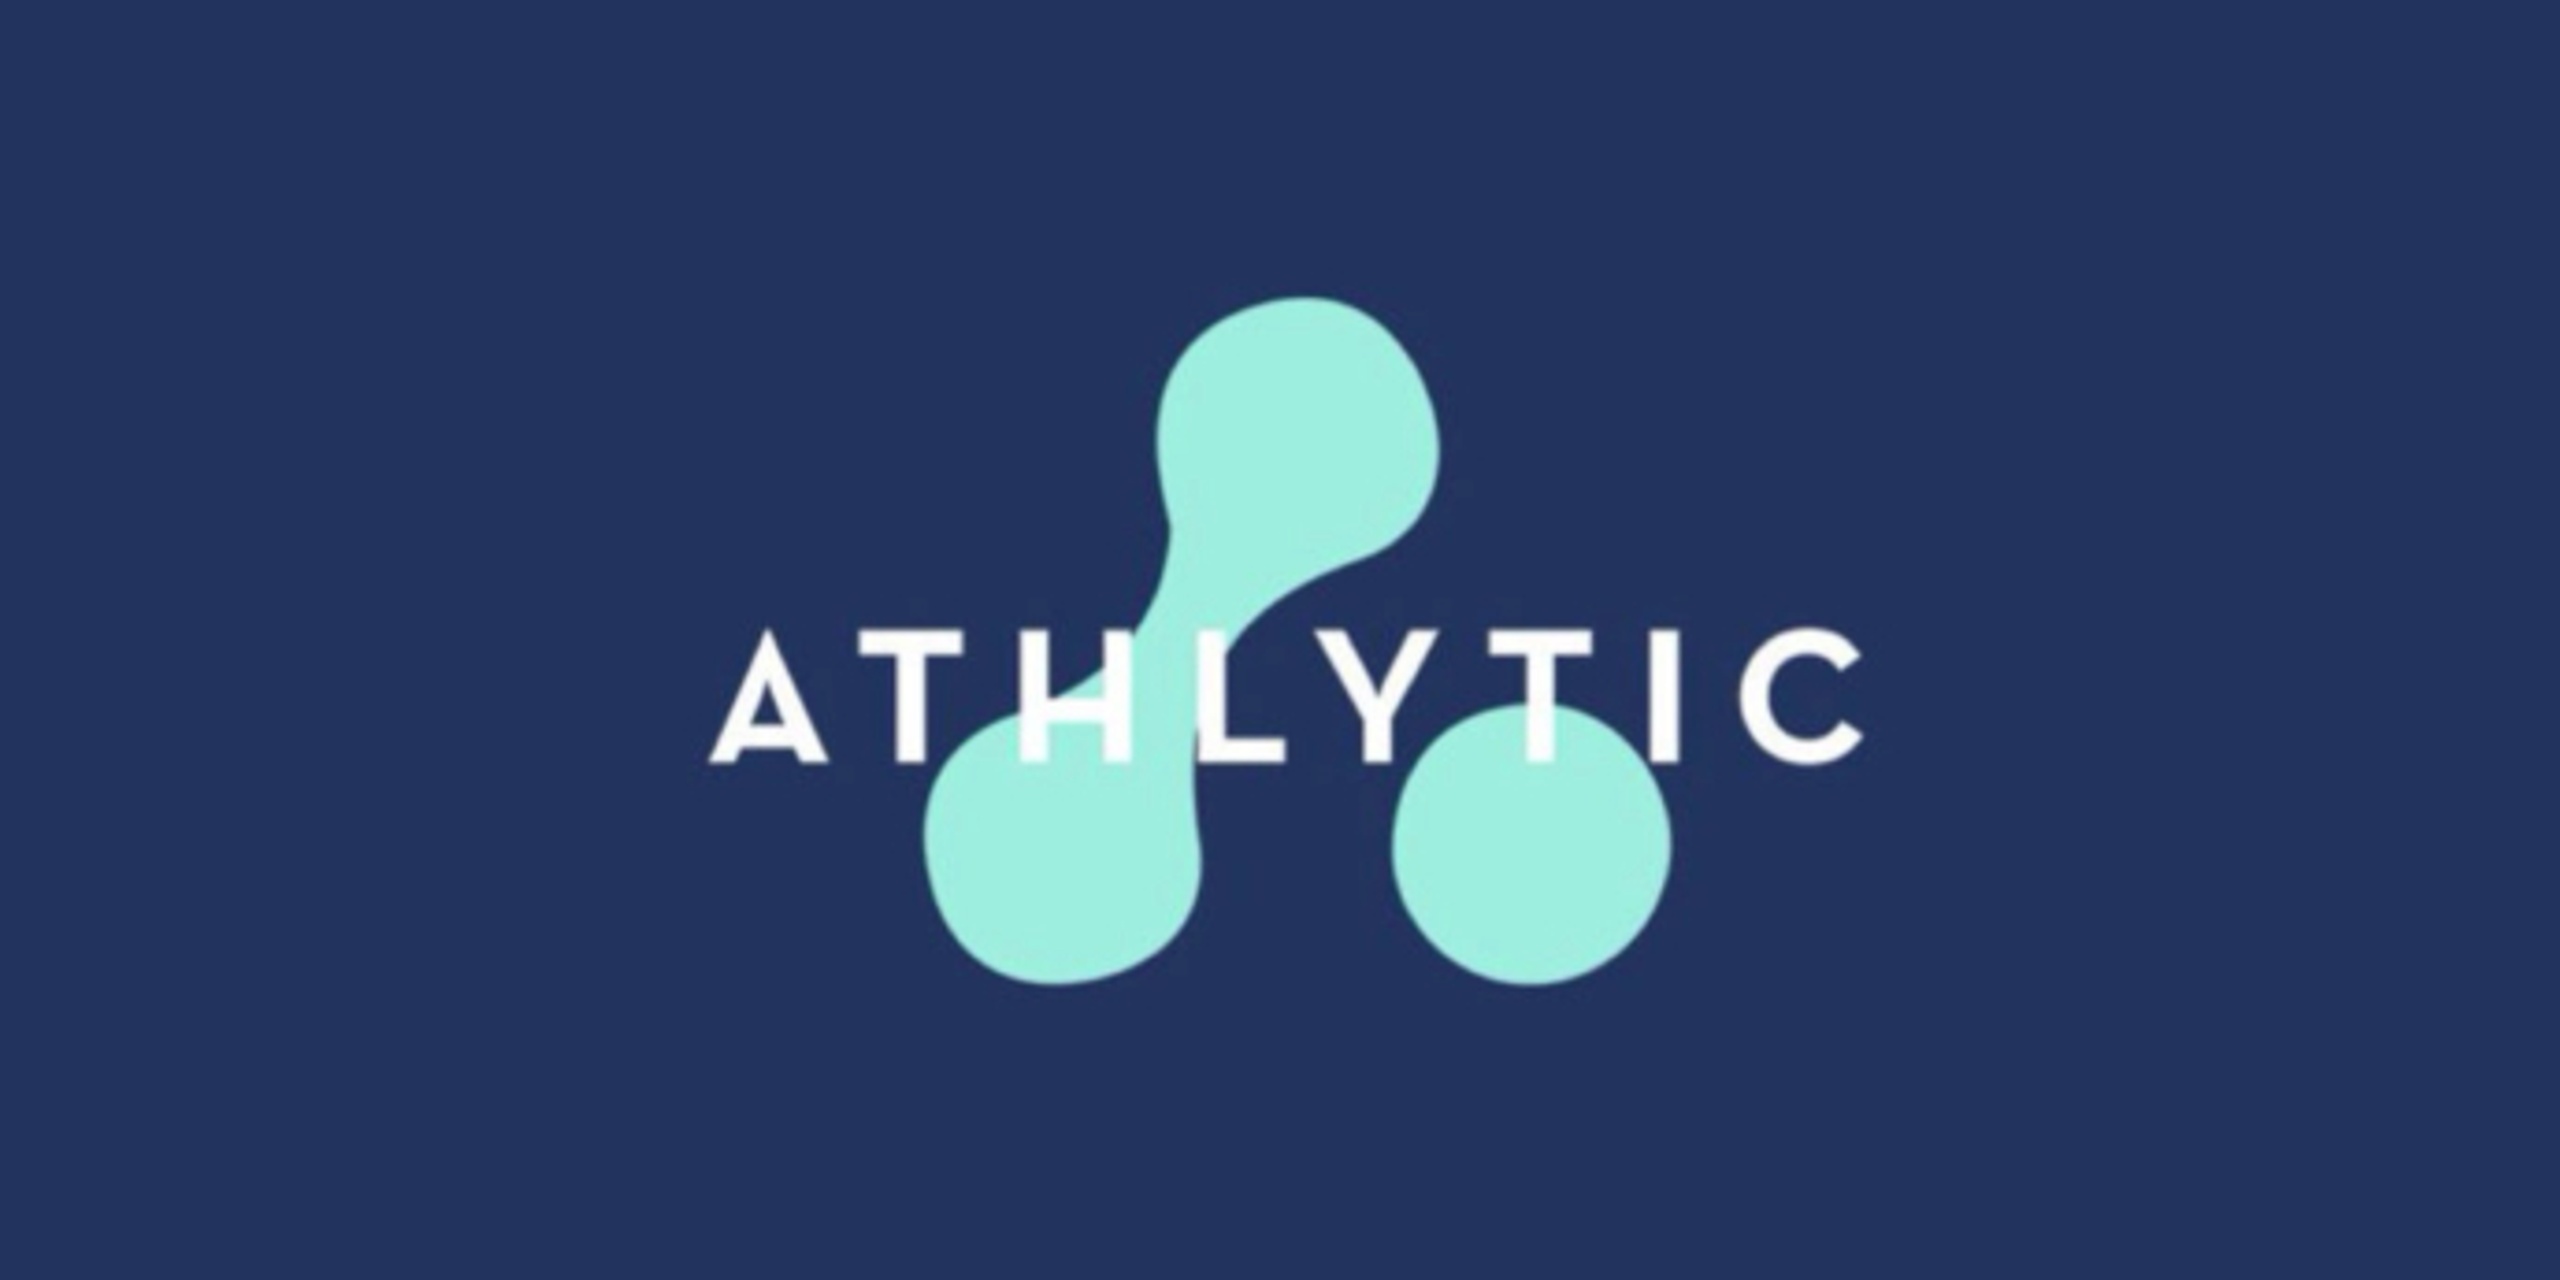 Athlytic: Entrepreneurs create platform to connect brands, student-athletes